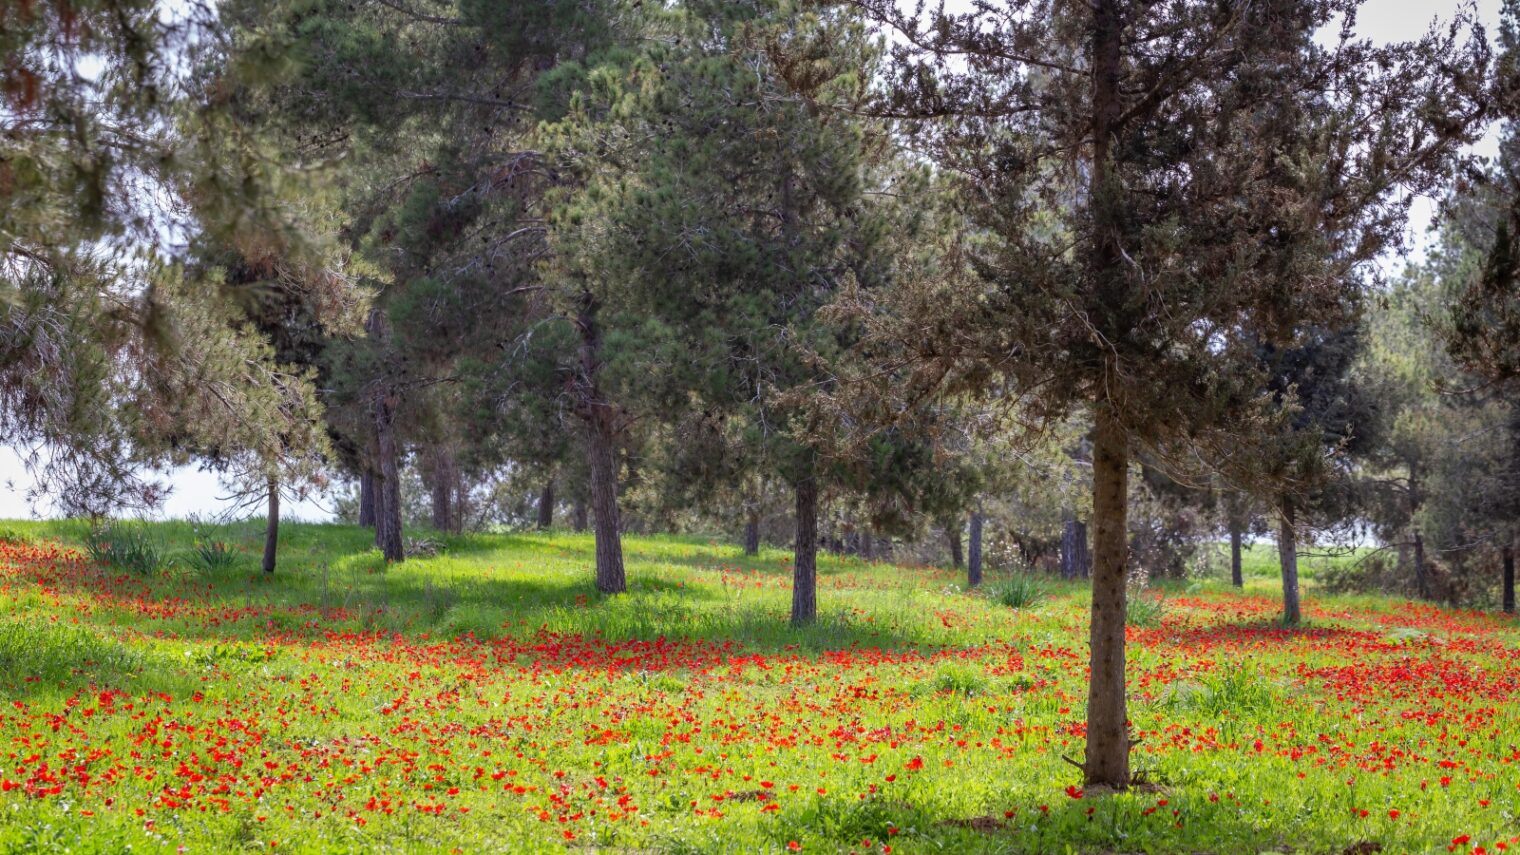 The Negev is carpeted with wildflowers every spring. Photo by Alon Yasovsky